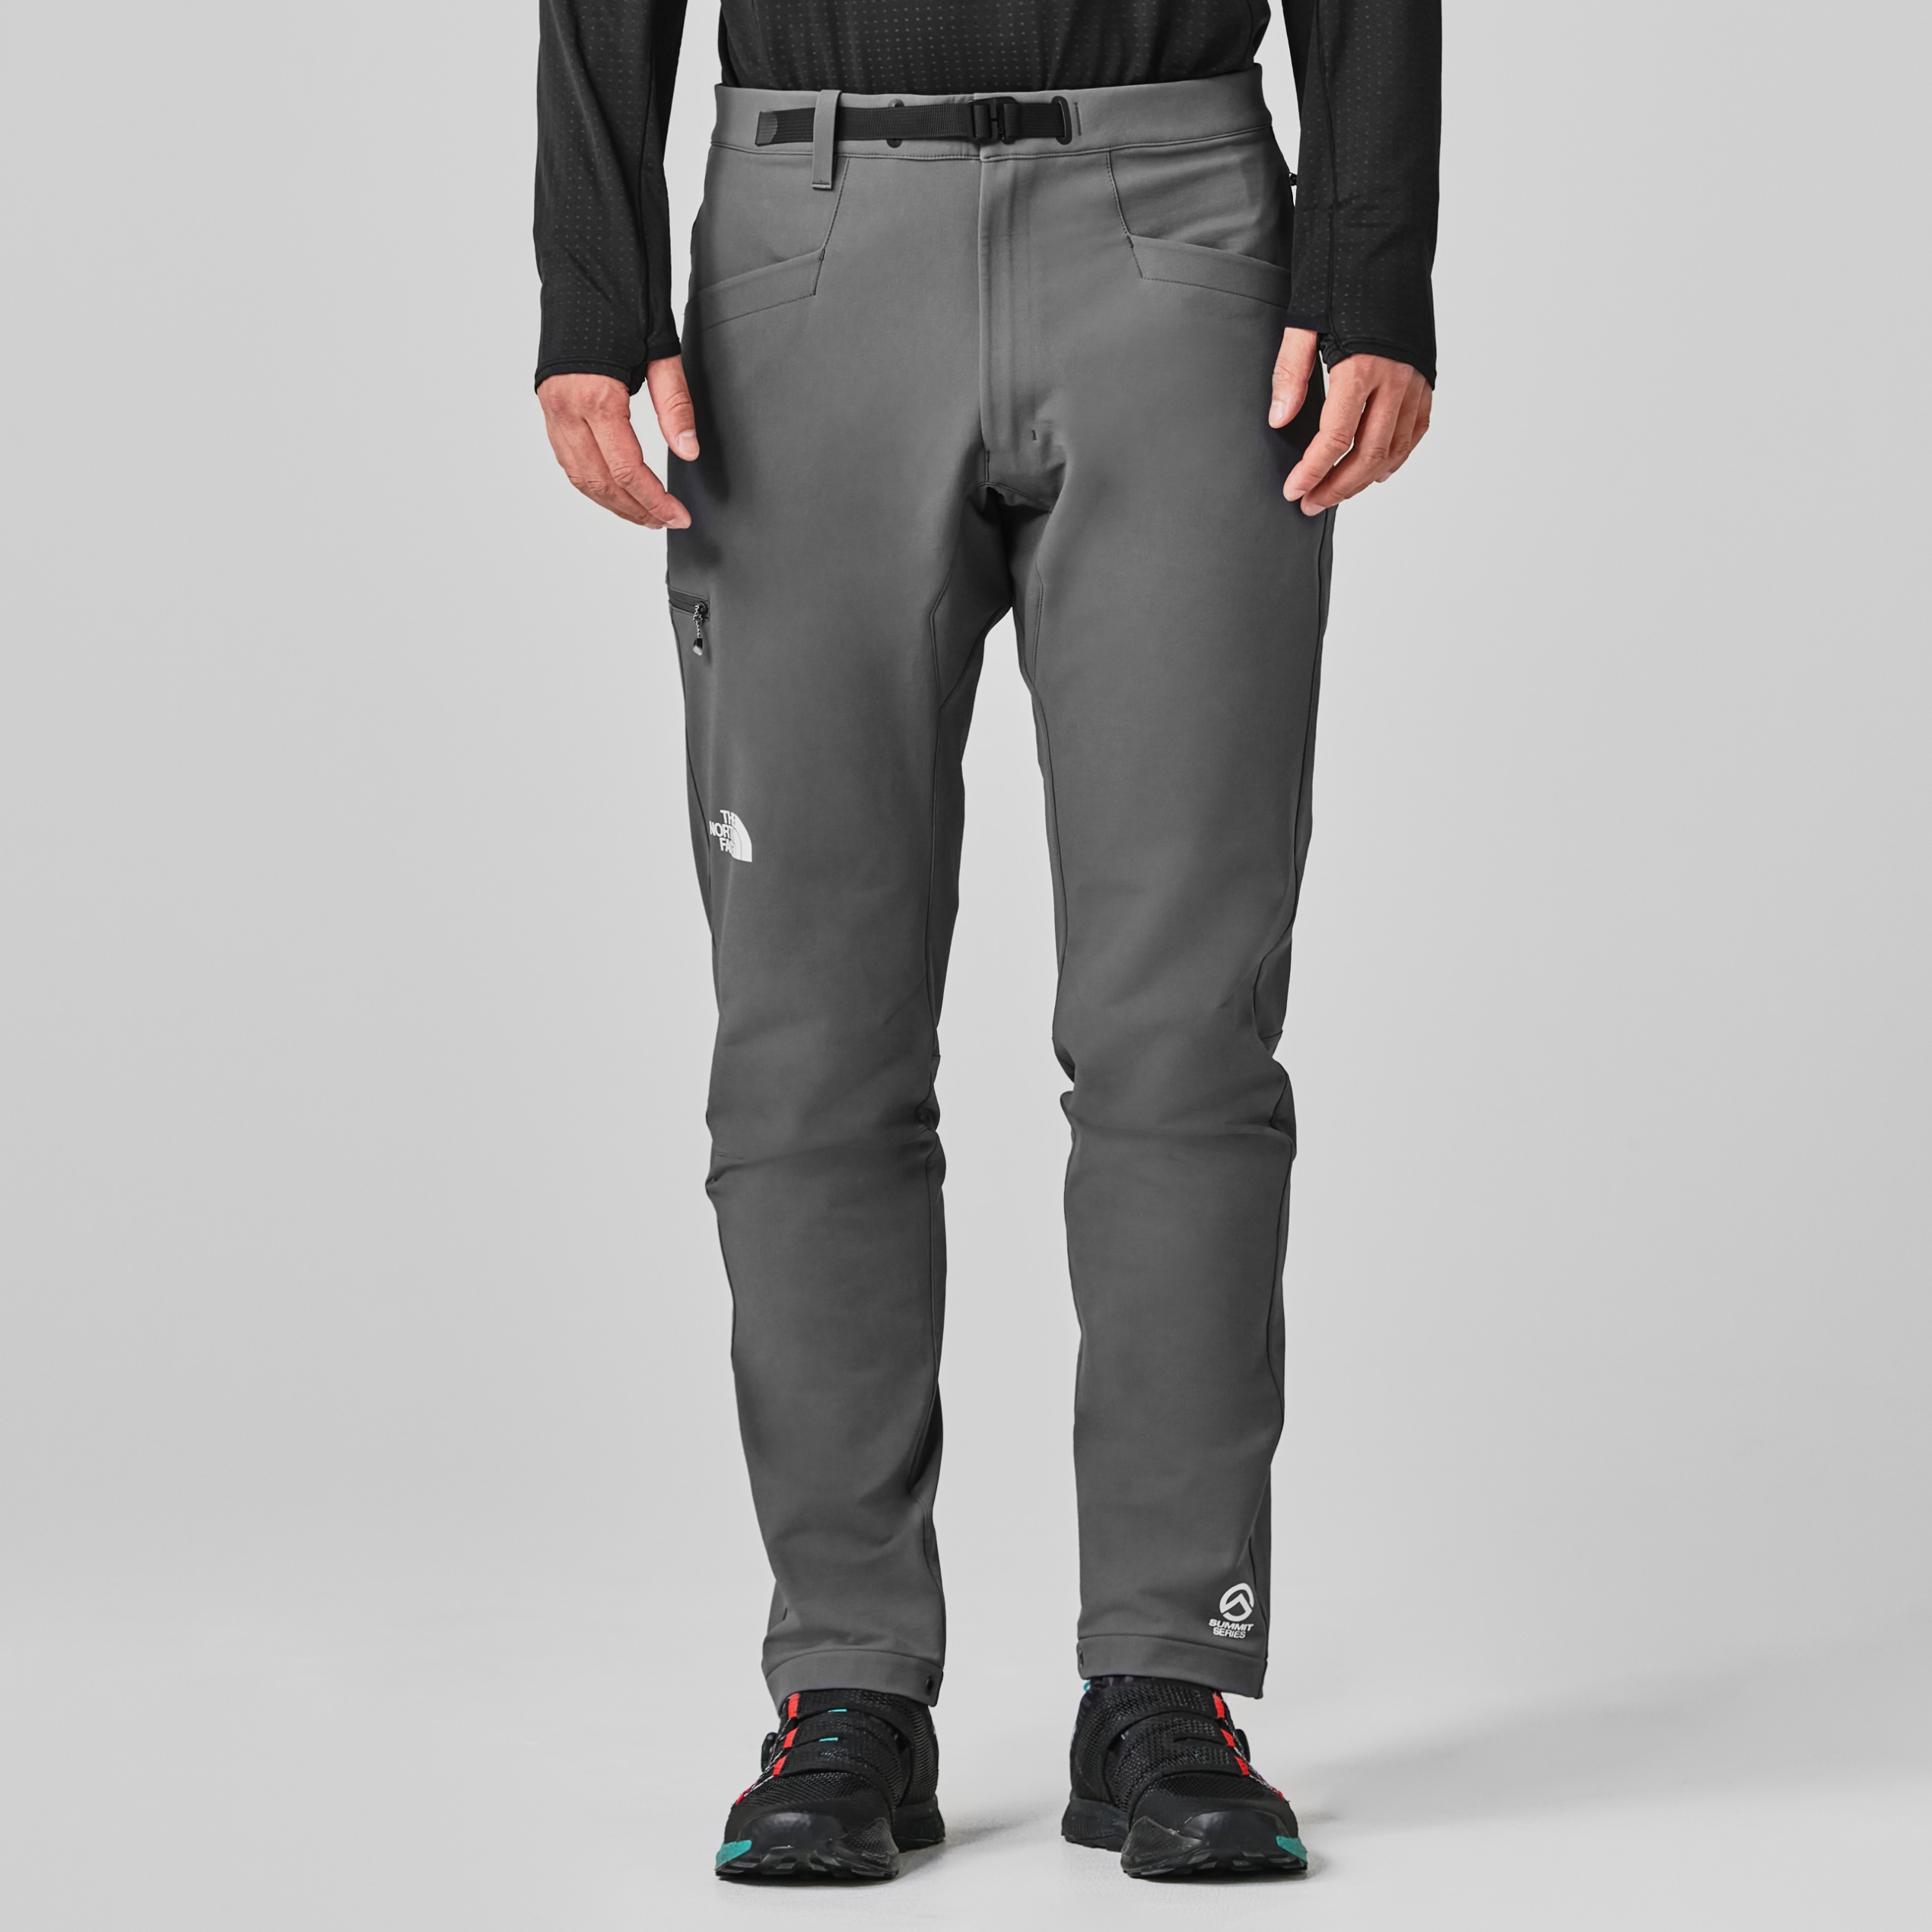 BIG WALL PANT (NB32021 / UNISEX) - THE NORTH FACE MOUNTAIN